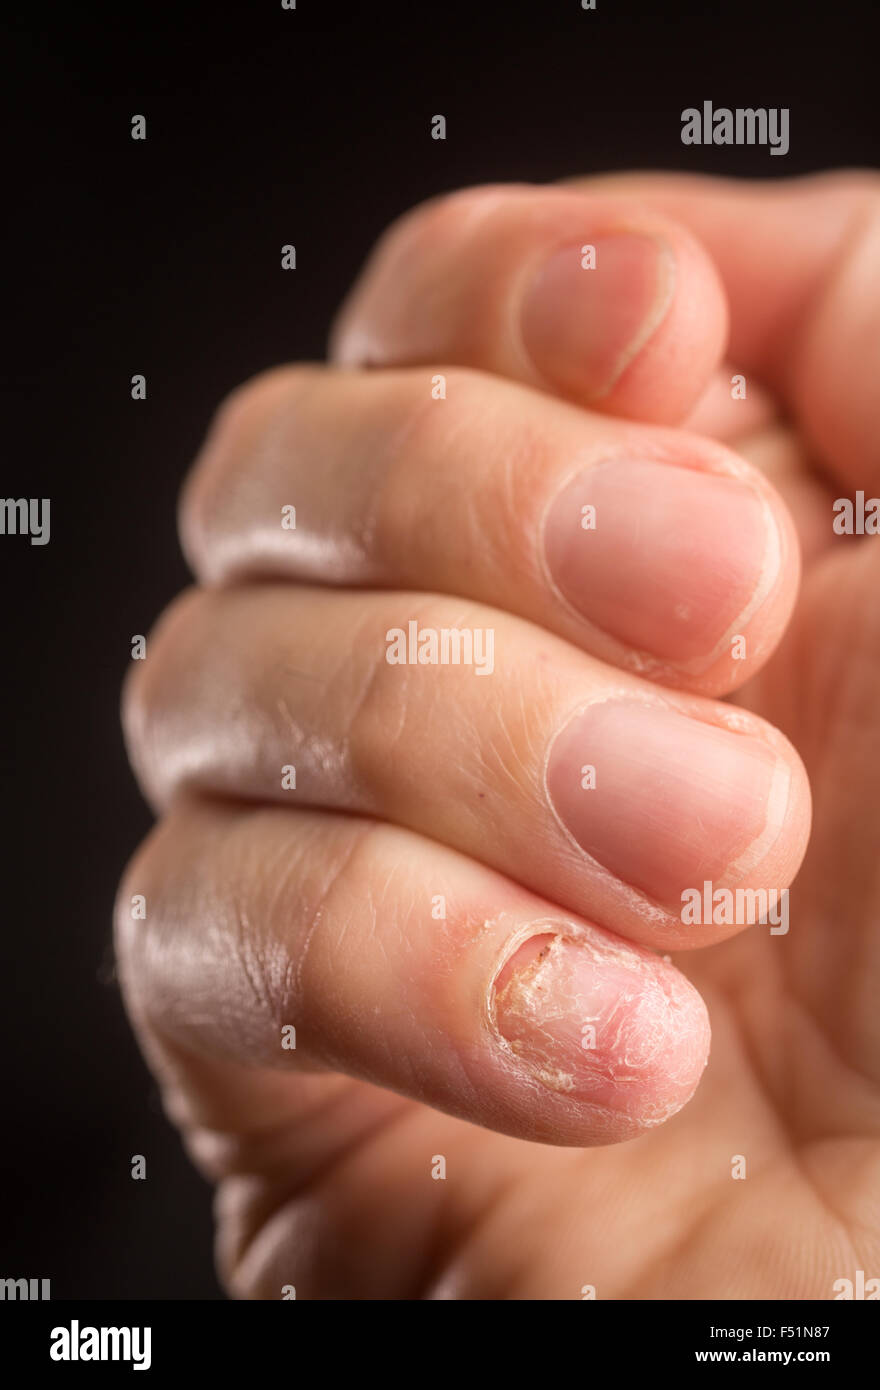 An adult male hand with a missing fingernail Stock Photo